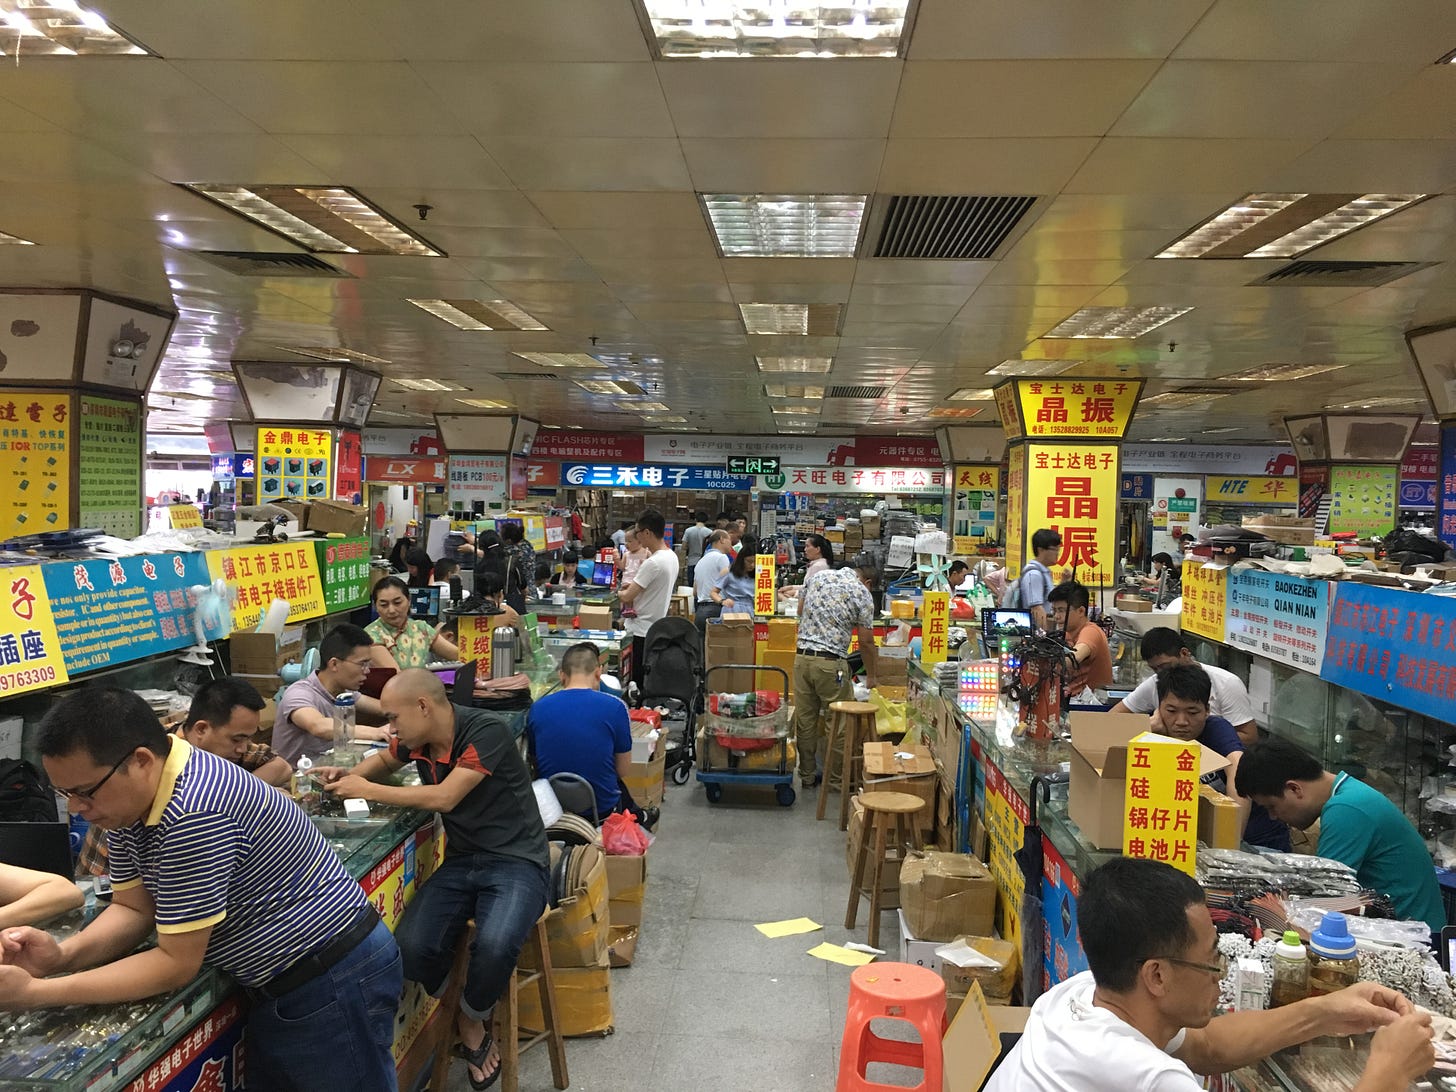 Crowded electronics market with colorful signs, booth with people sitting and plastic stools